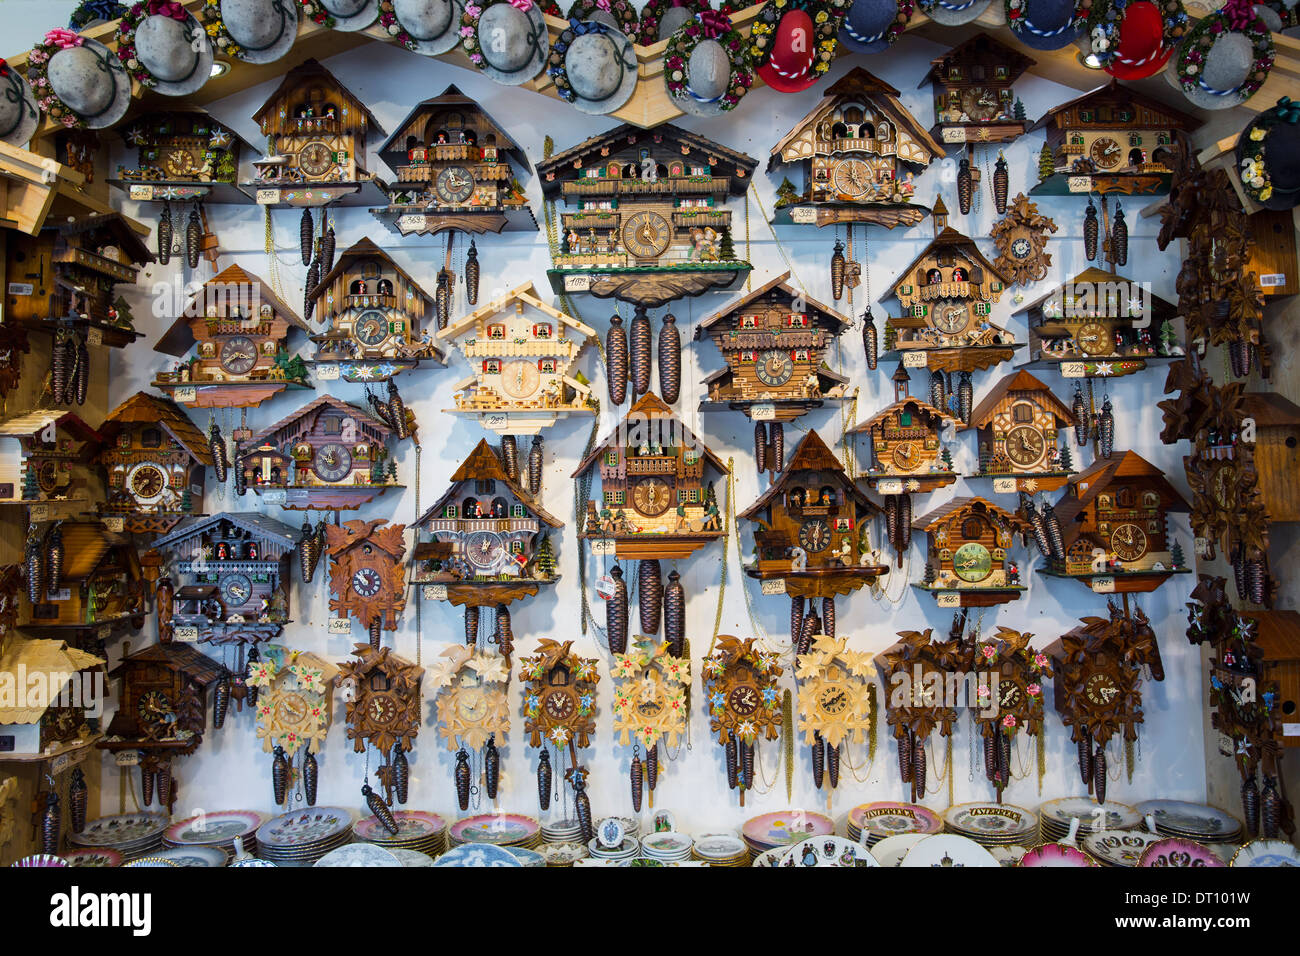 Traditional cuckoo clocks on sale in Geschenkehaus shop in the town of Seefeld in the Tyrol, Austria Stock Photo